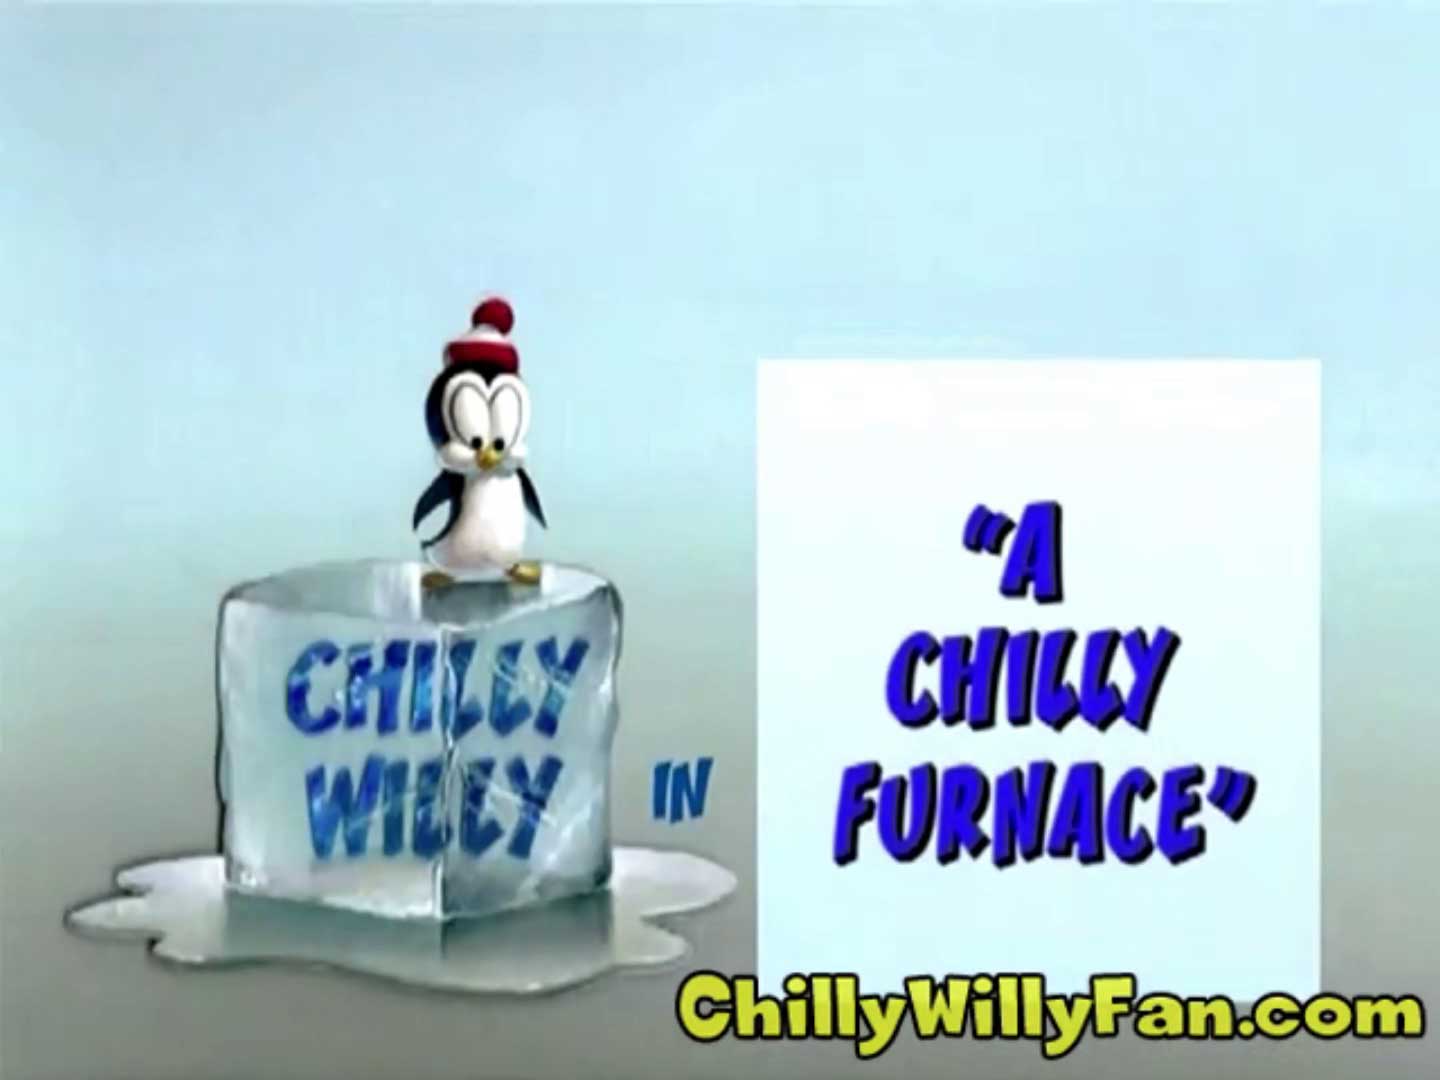 Chilly Willy - A Chilly Furnace